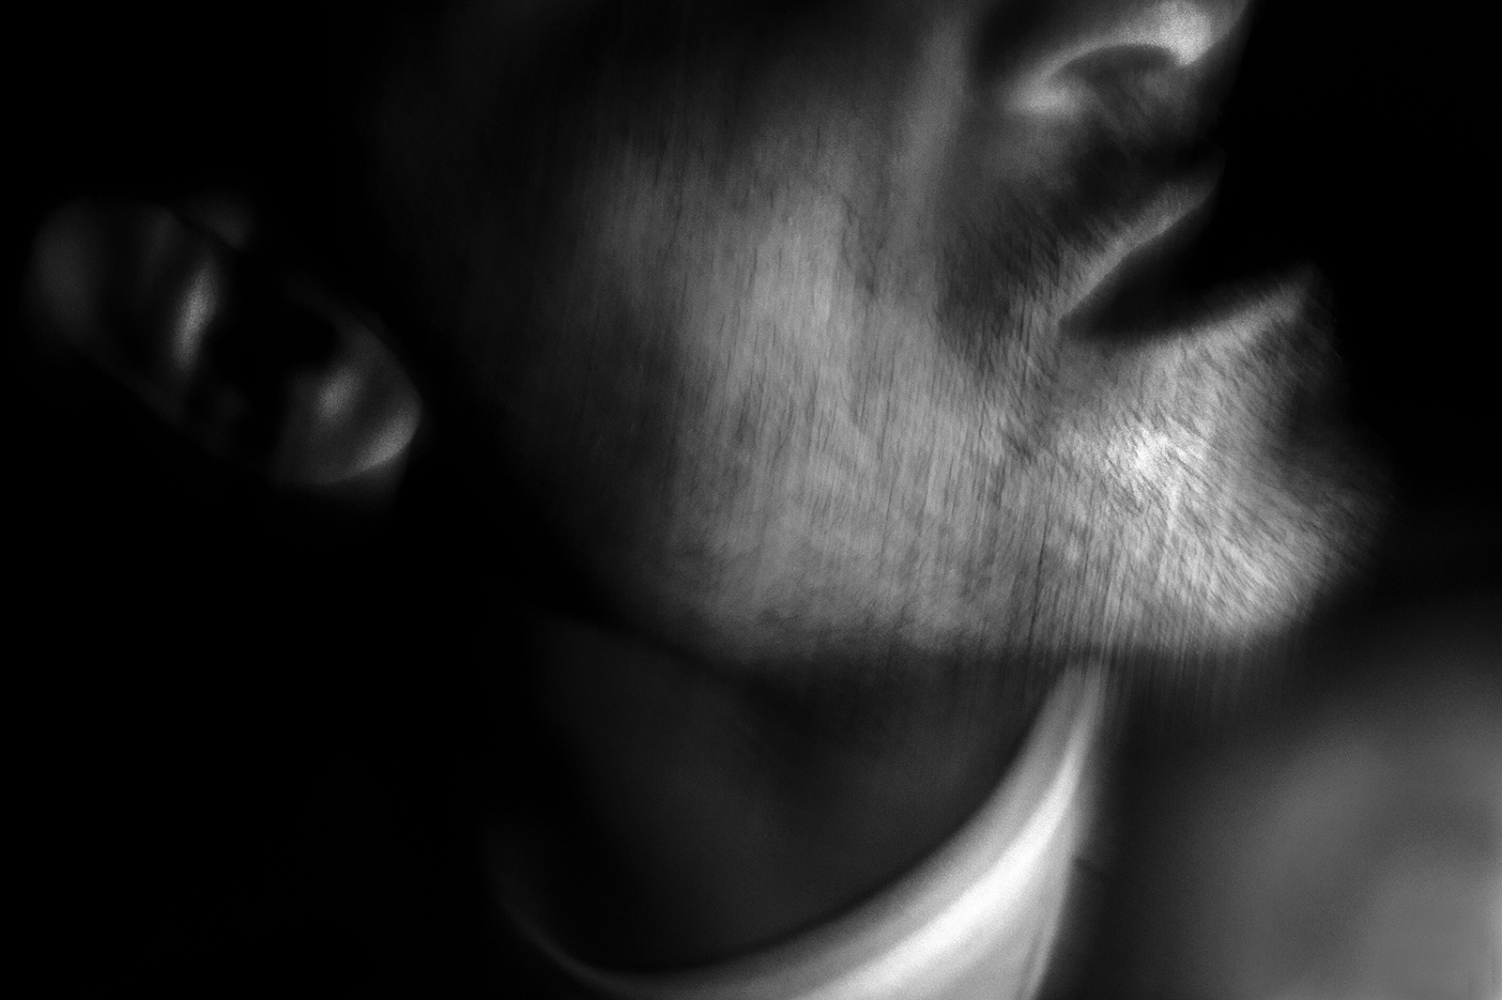  The blurred profile of a man emerges from the darkness that confuses his features while his mouth pronounces disconnected phrases. 